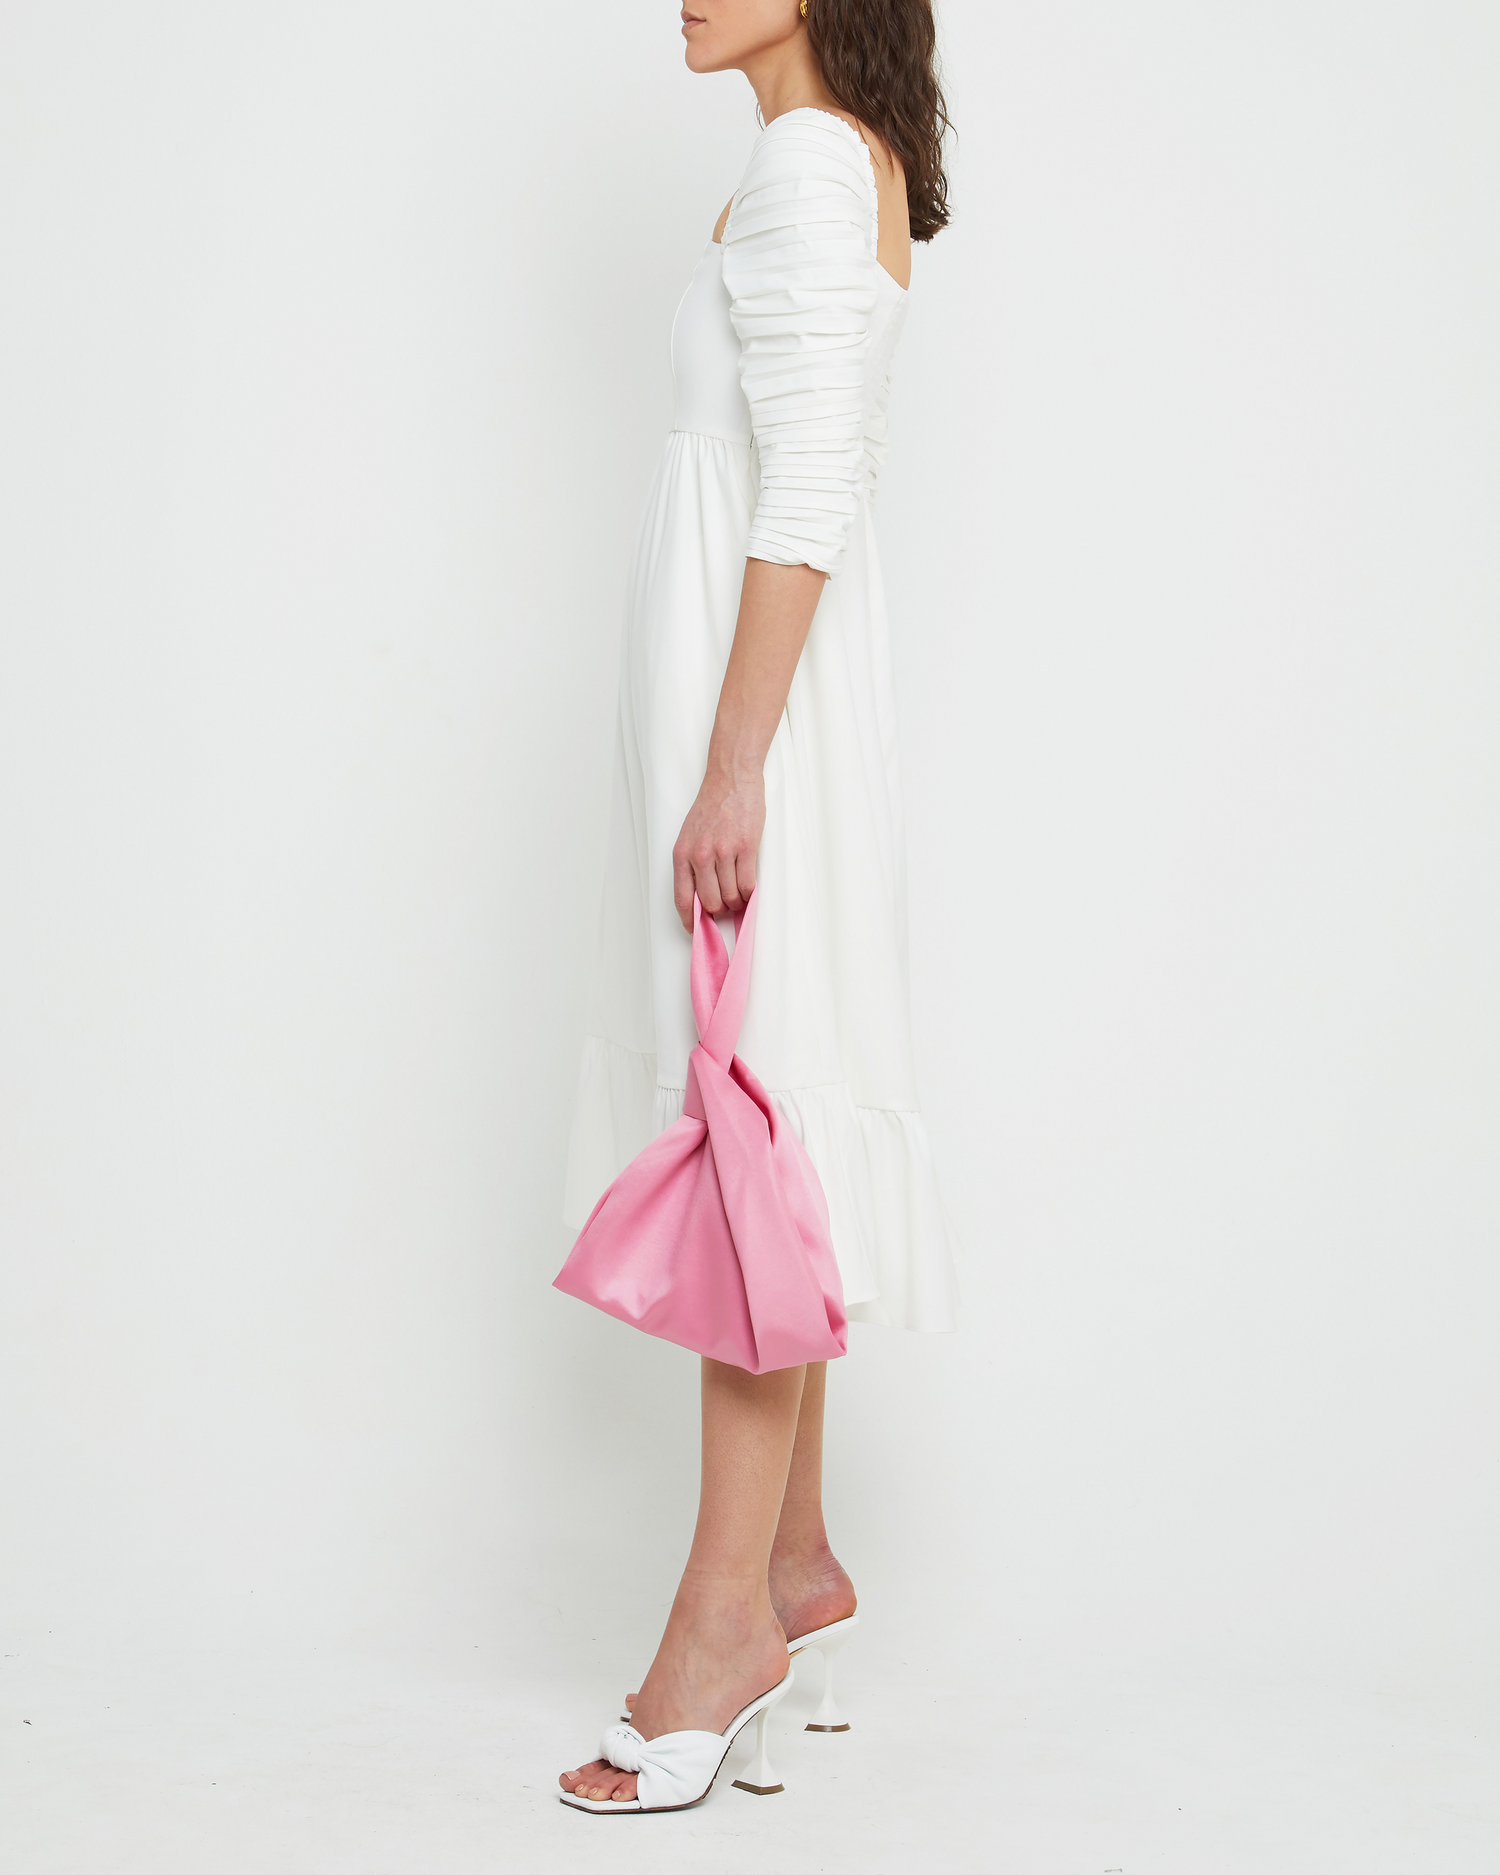 Third image of Bonnie Dress, a white midi dress, ruched bodice, mid sleeves, 3/4 sleeves, square neckline